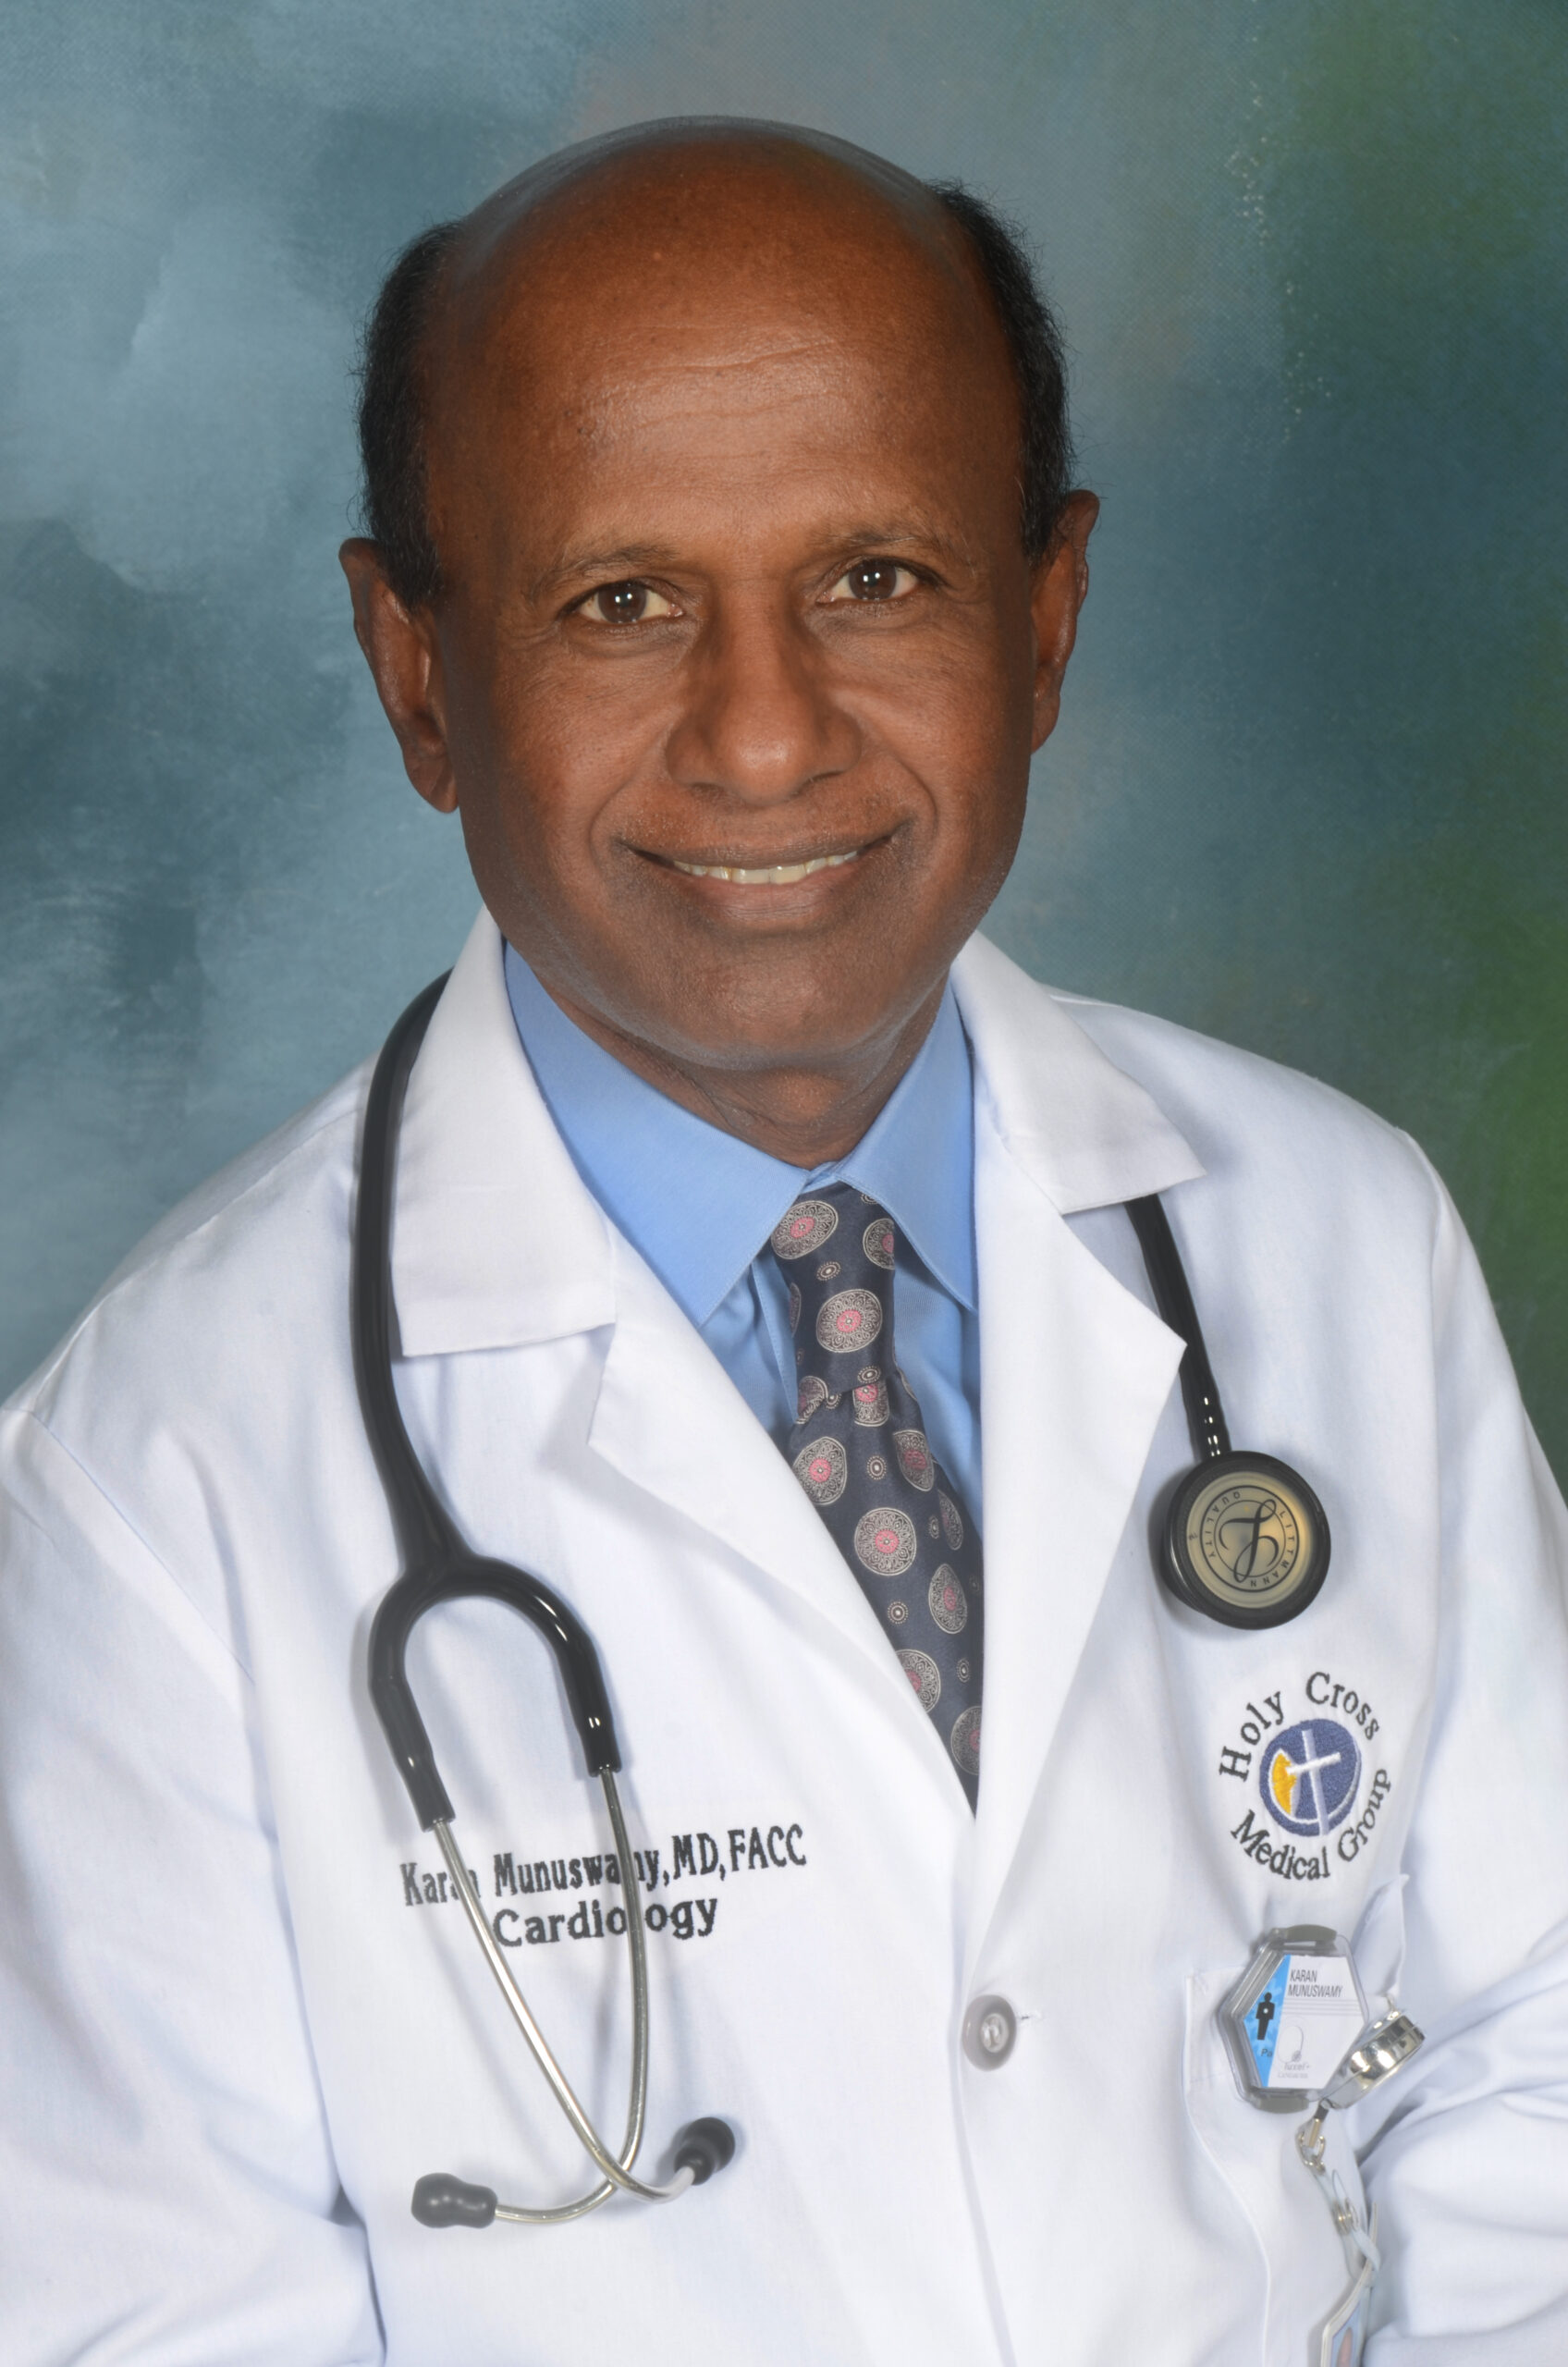 Holy Cross Health Physician Joins the Development Team